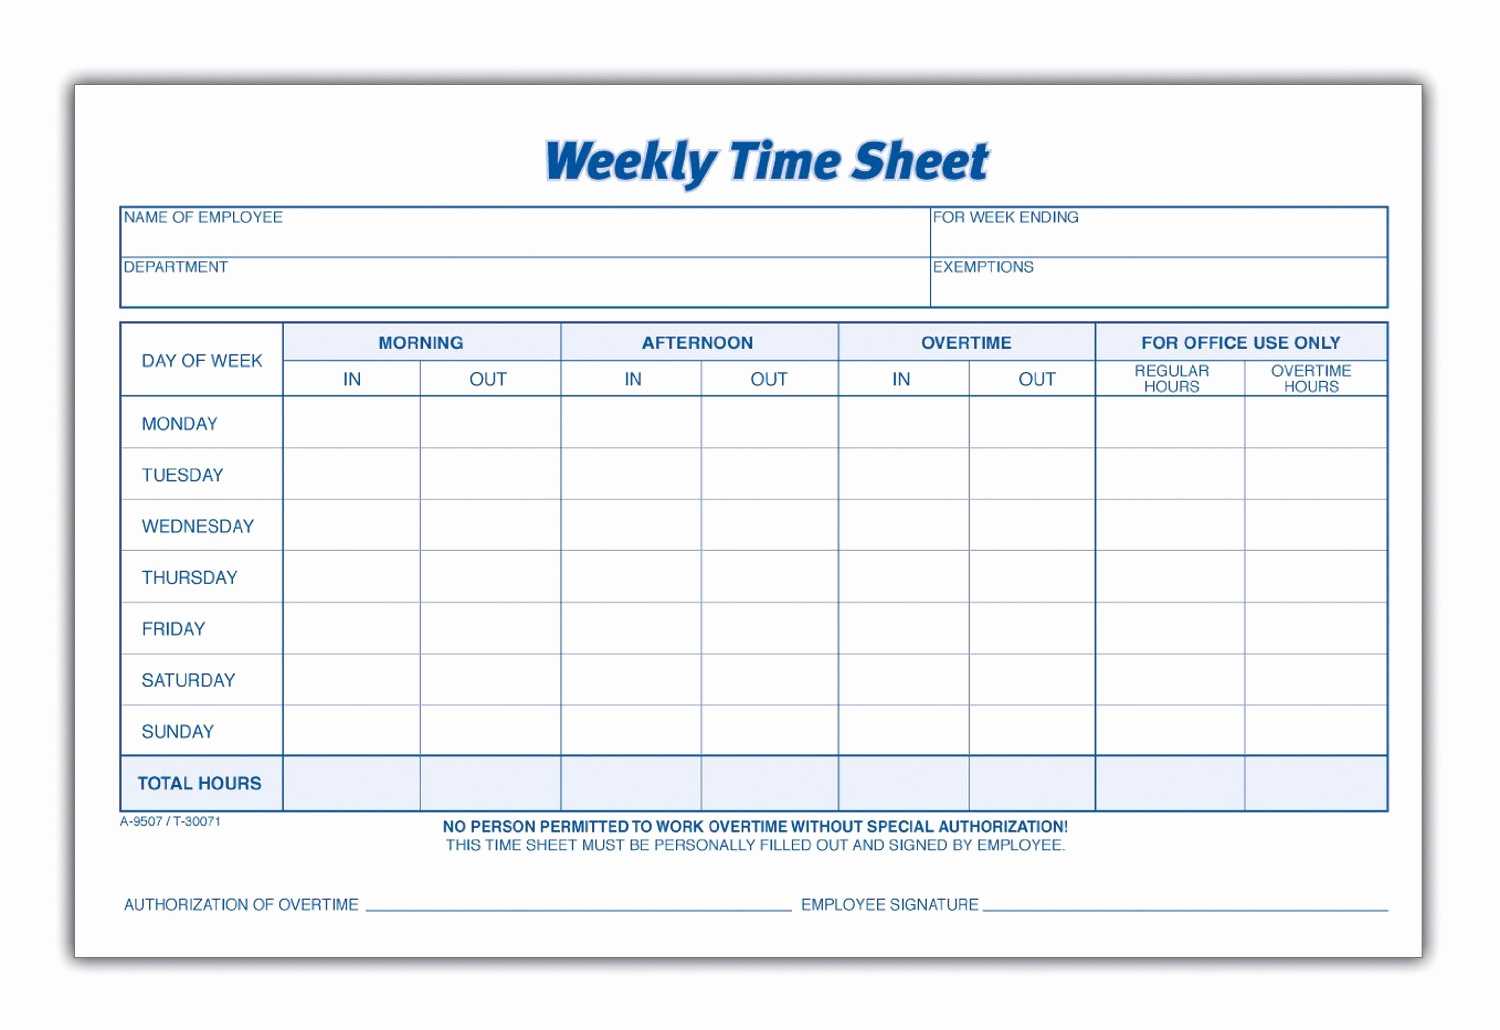 Timesheet Worksheet | Printable Worksheets And Activities Throughout Weekly Time Card Template Free